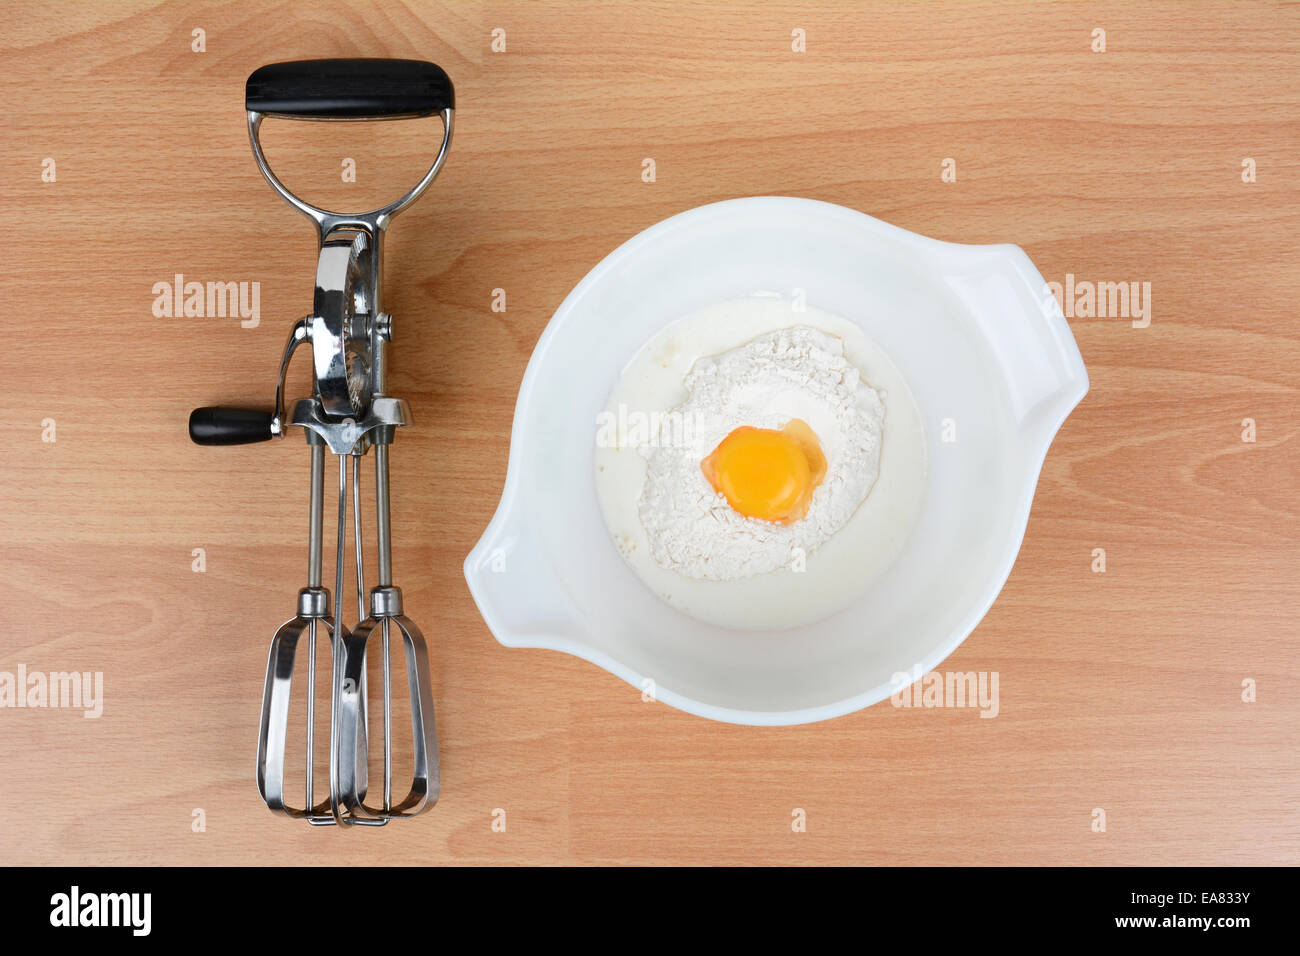 https://c8.alamy.com/comp/EA833Y/high-angle-shot-of-a-bowl-with-milk-egg-and-flour-with-a-old-fashioned-EA833Y.jpg